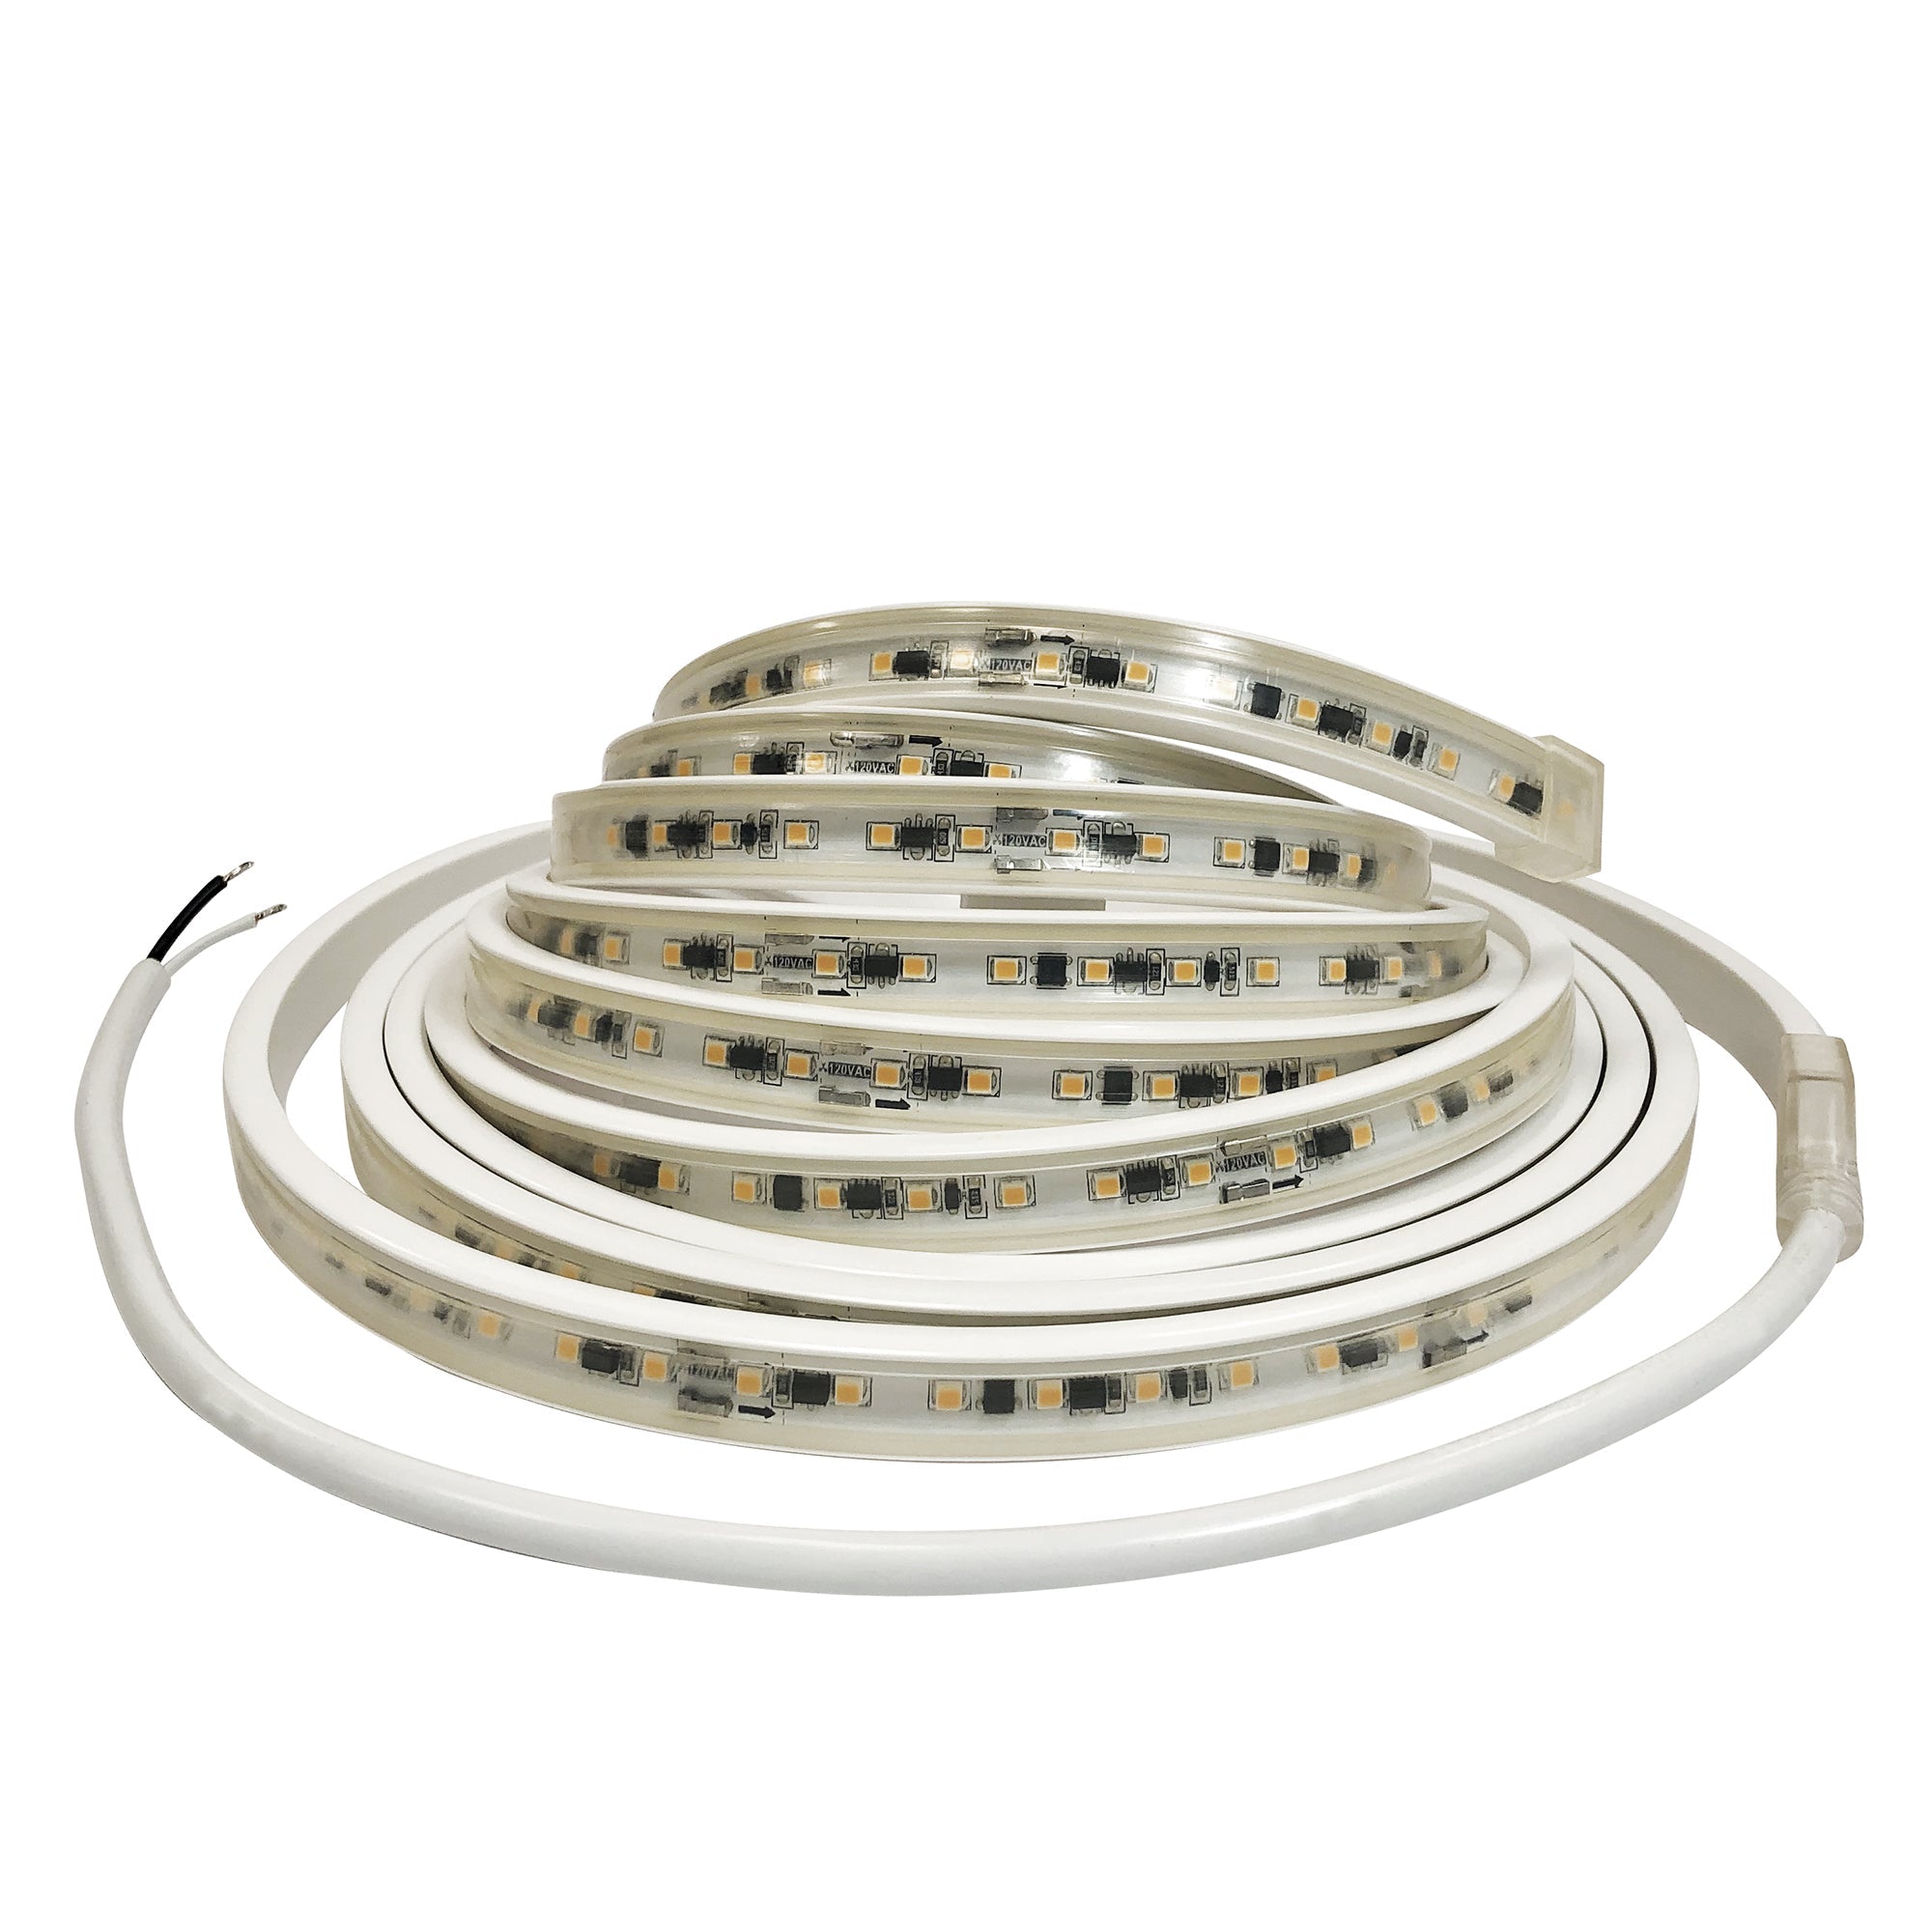 Nora Lighting NUTP13-W60-12-930/HW - Accent / Undercabinet - Custom Cut 60-ft 120V Continuous LED Tape Light, 330lm / 3.6W per foot, 3000K, w/ Mounting Clips and 8' Hardwired Power Cord